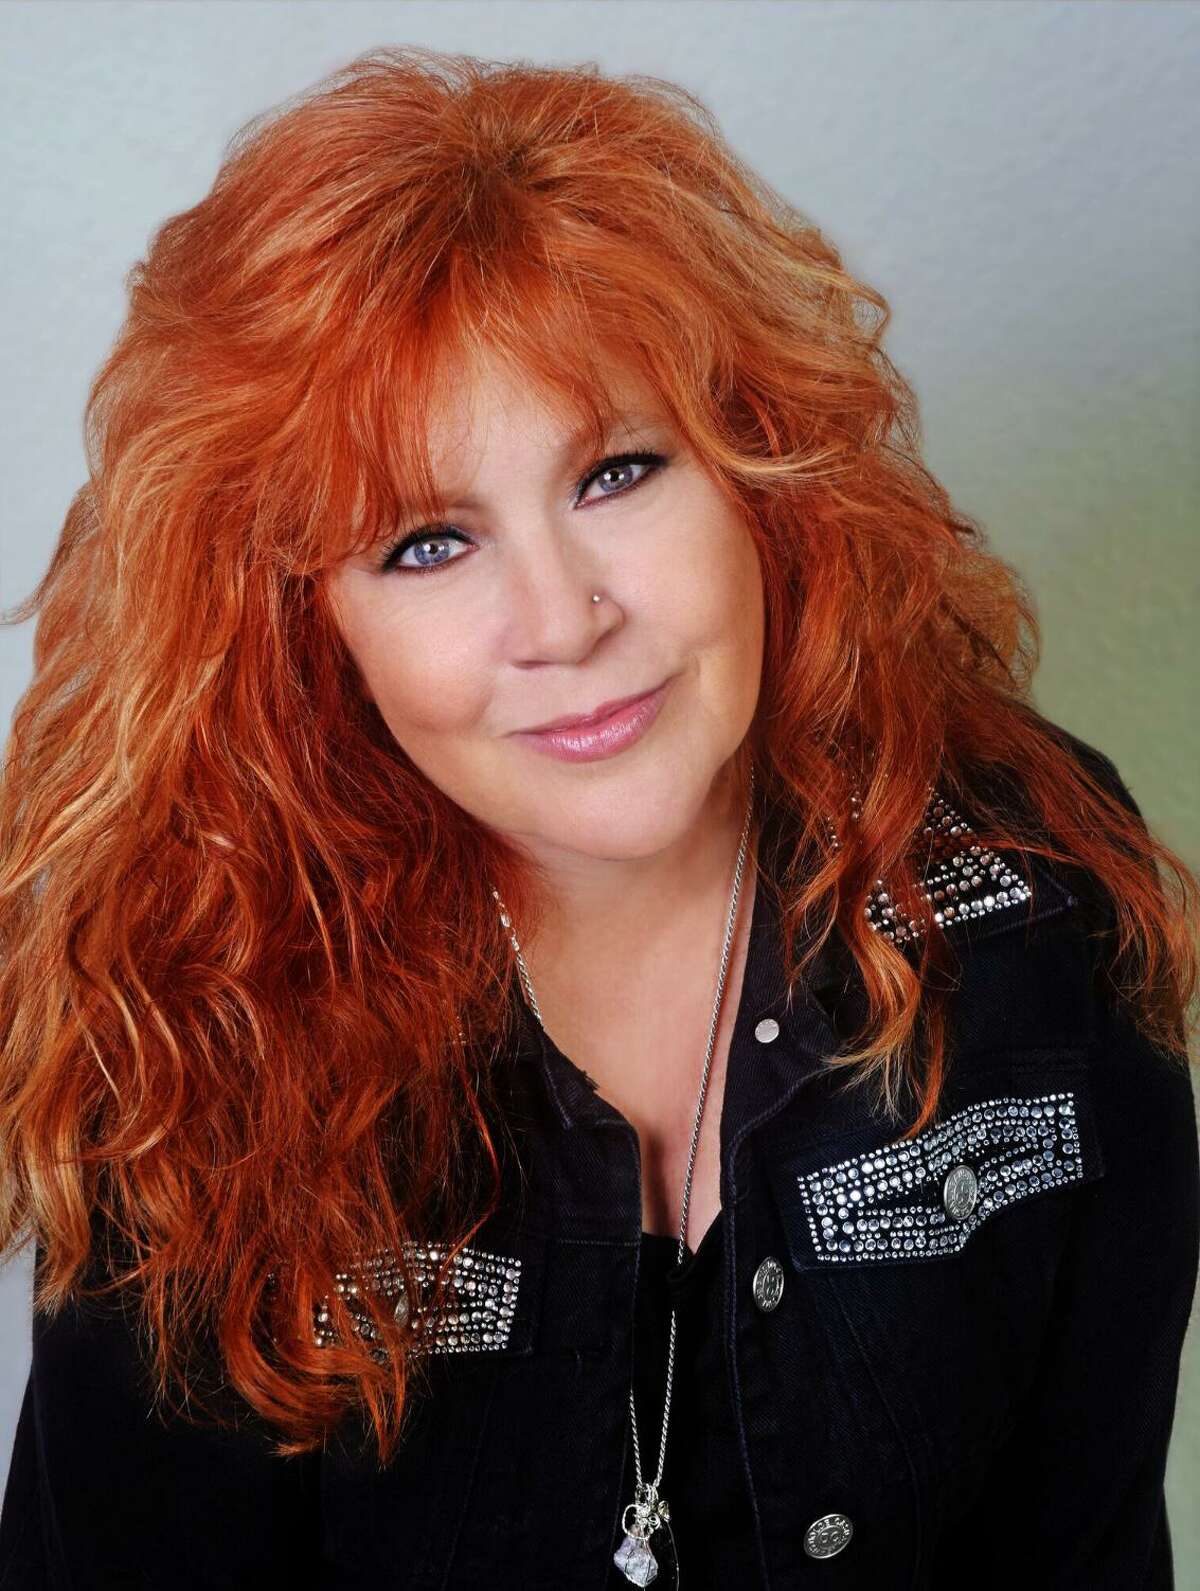 Country singer Lisa Layne, singing at the Honky Tonk Chili Challenge in downtown Tomball March 19.